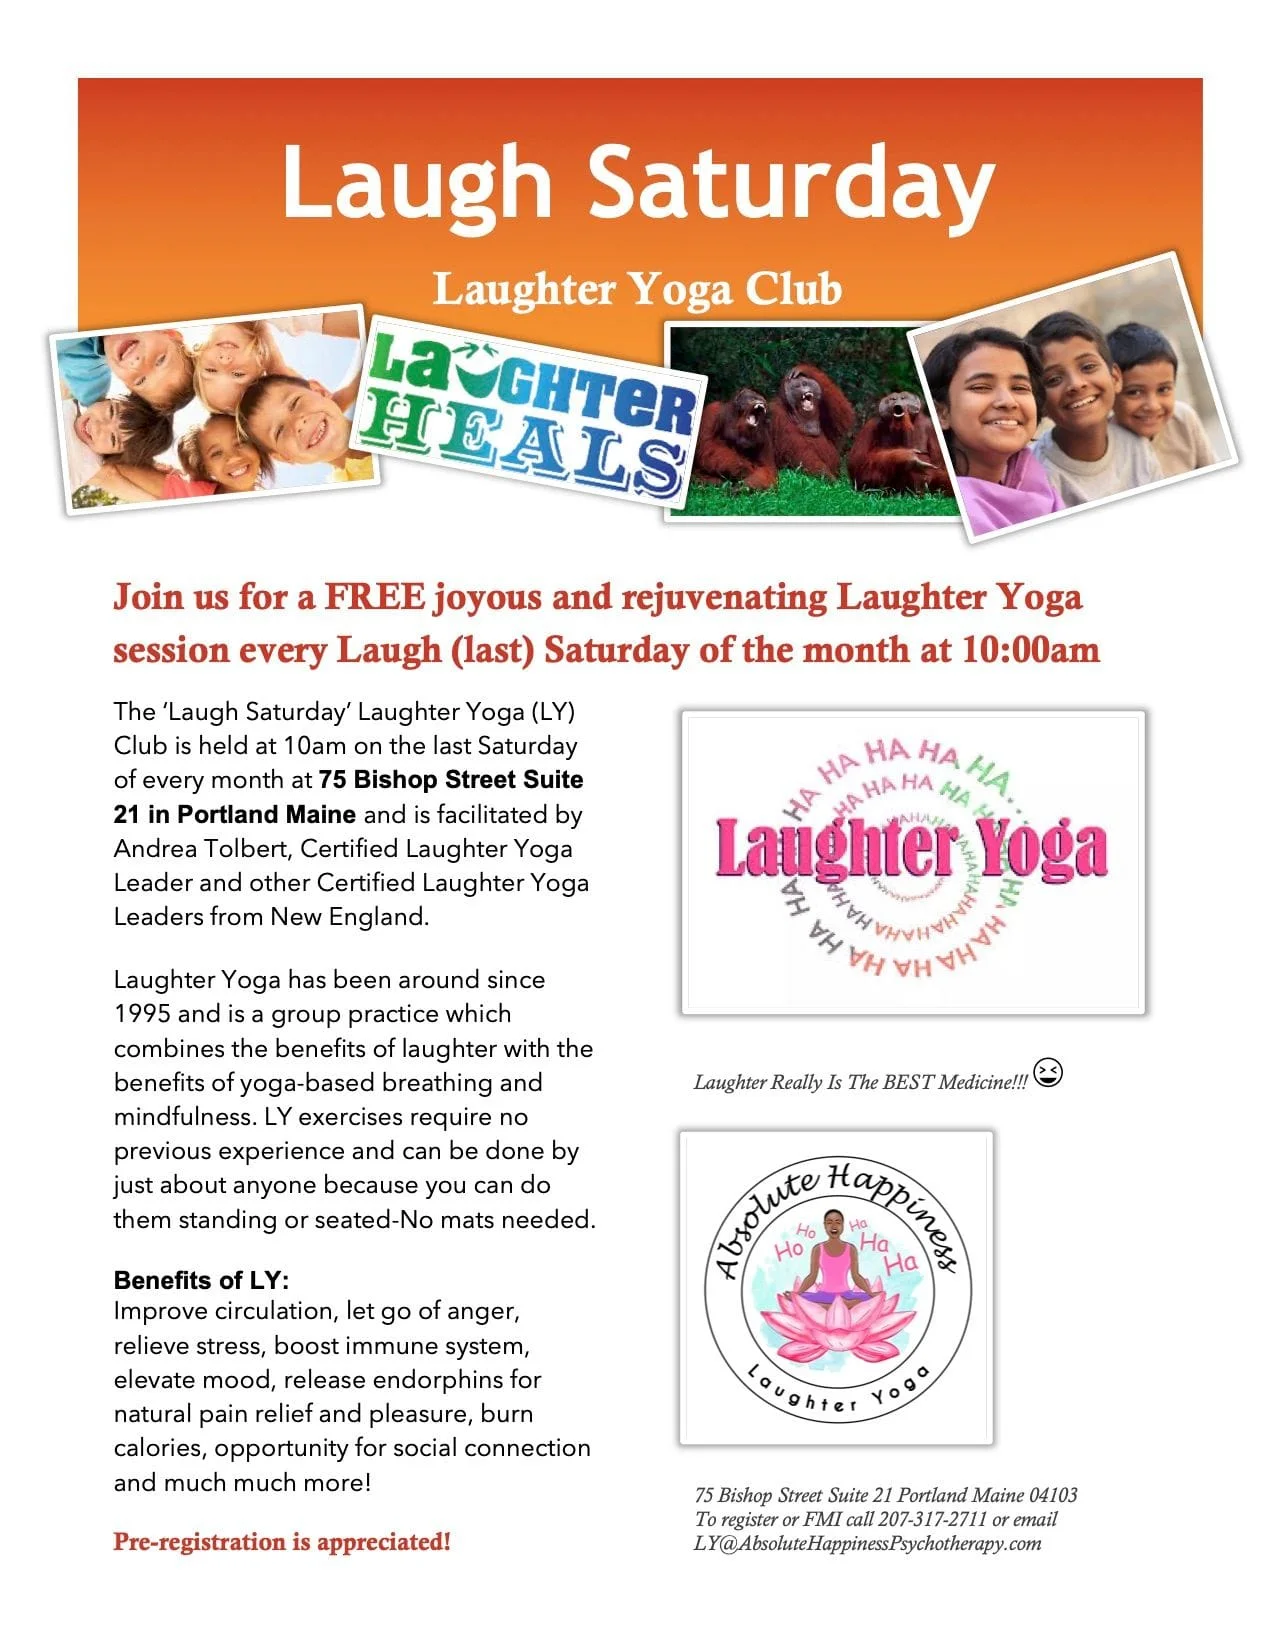 Laugh Saturday LY Flyer